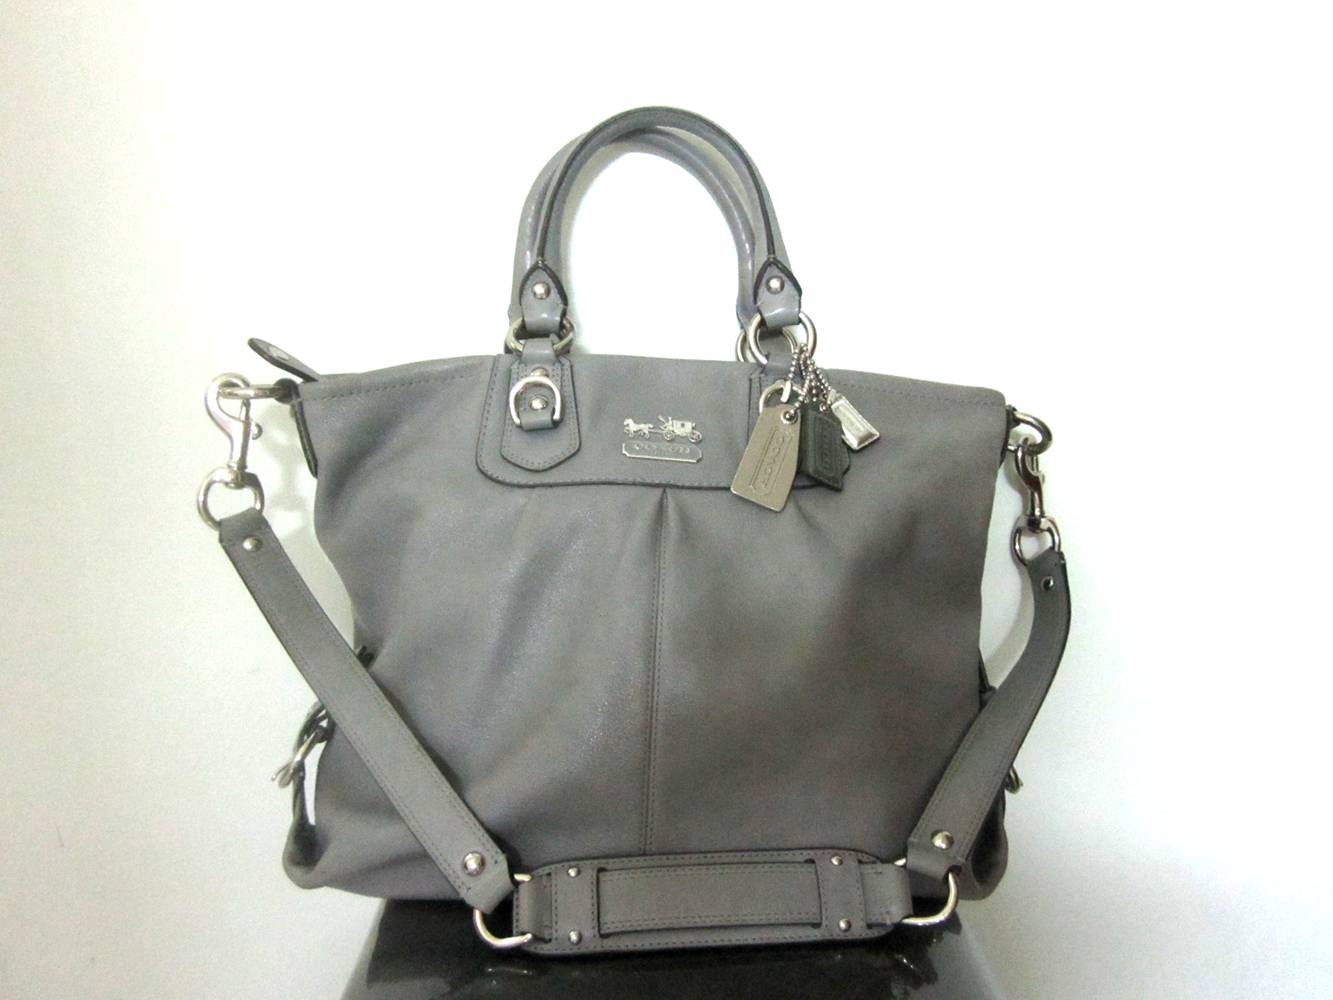 The Bags Affairs ~ Satisfy your lust for designer bags: COACH GREY LEATHER LARGE SATCHEL(0712-05)